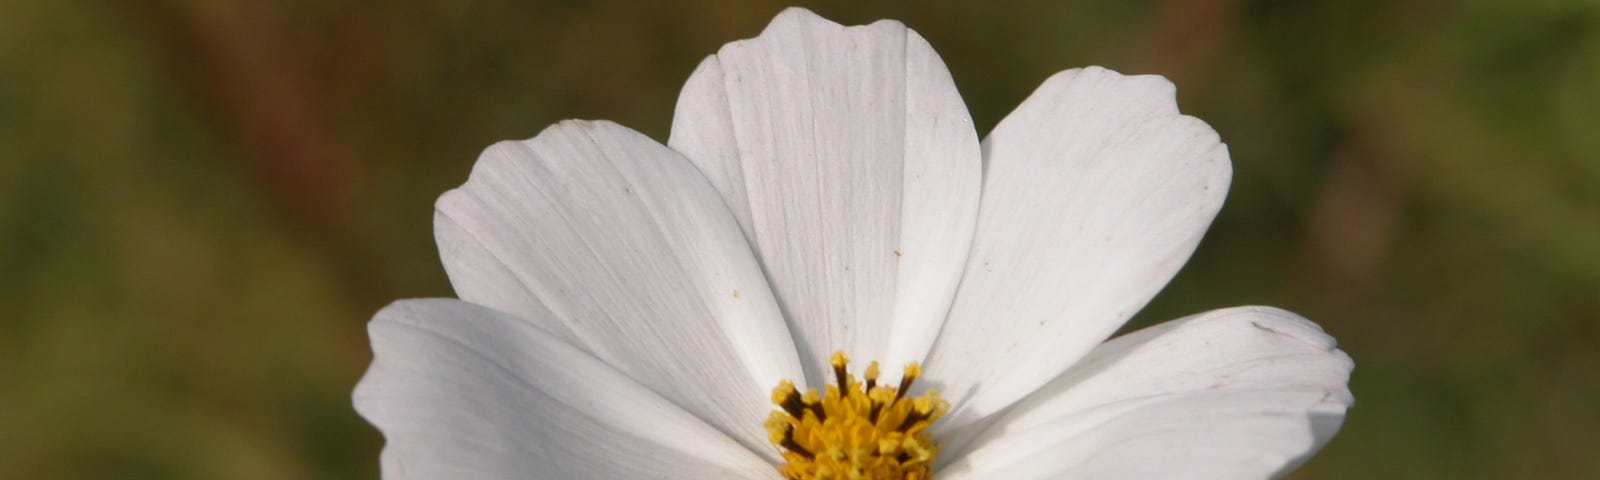 A close-up of a beatiful white flower on a darker background